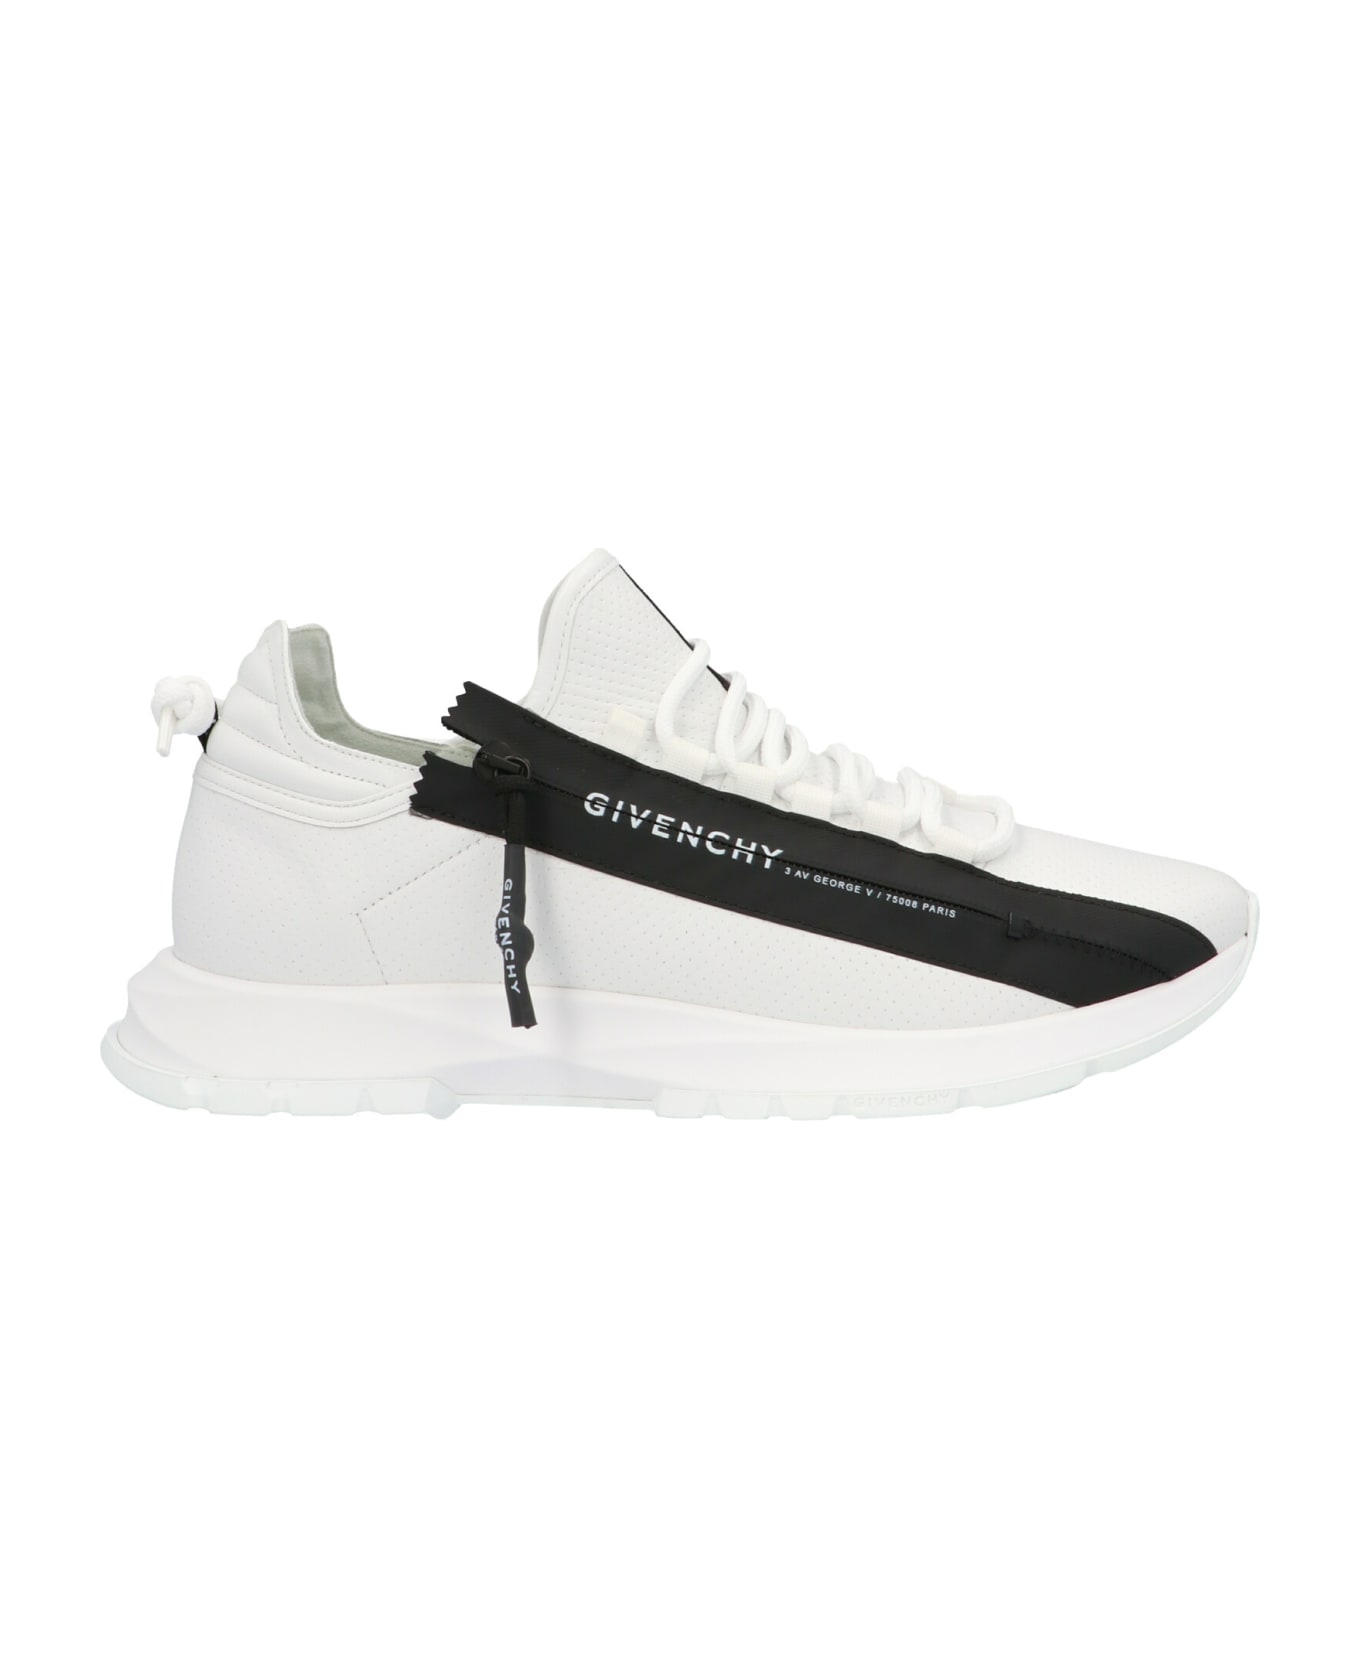 Givenchy 'spectre' Shoes